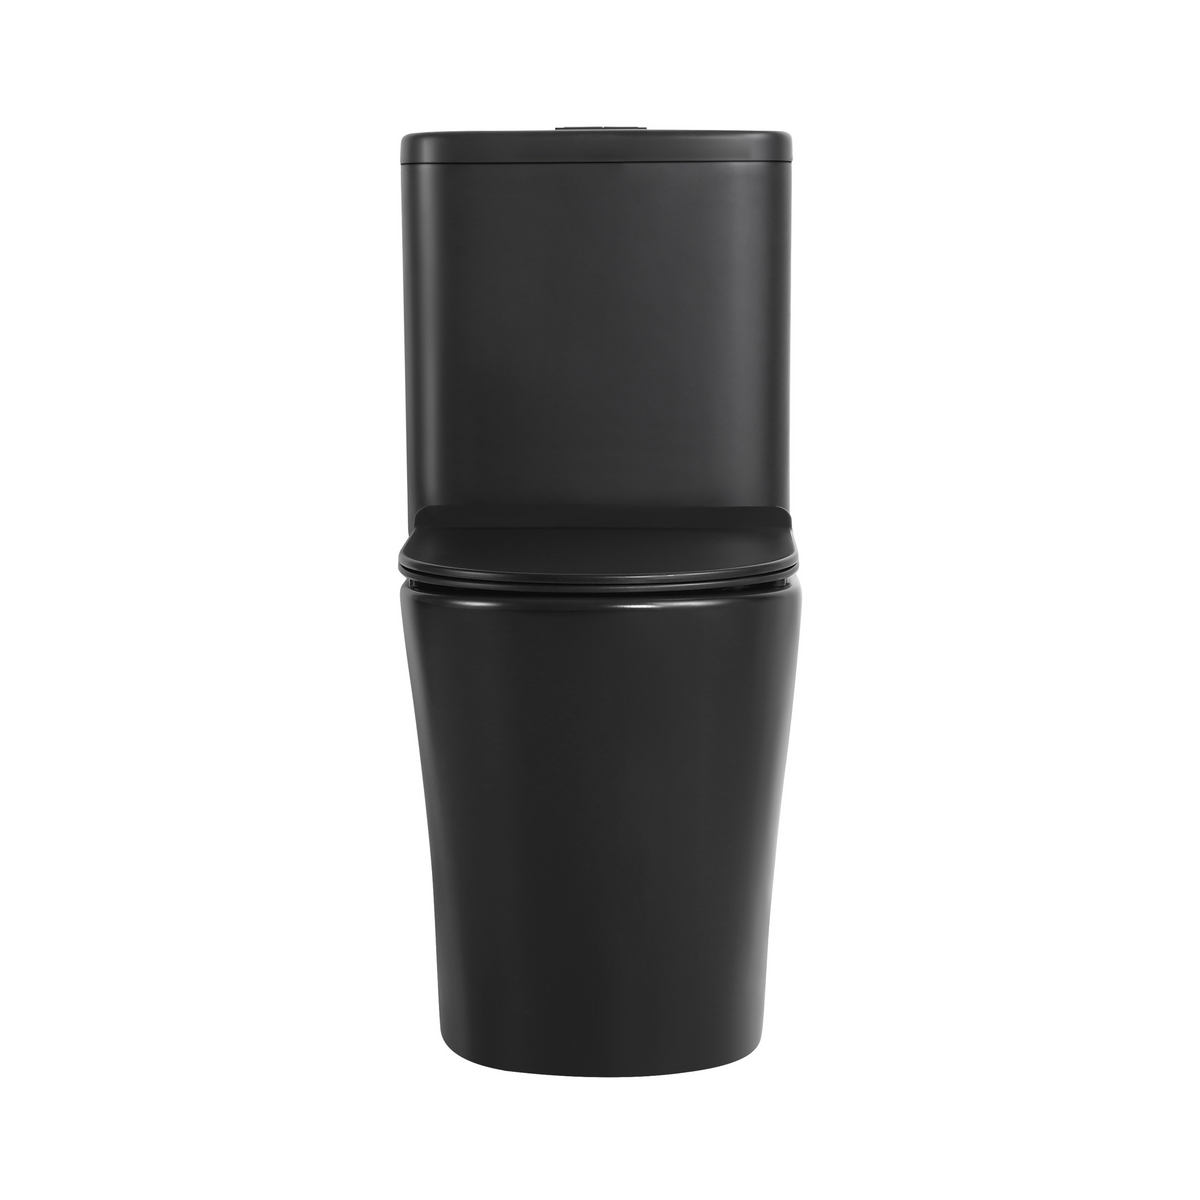 Mini Cyclone Back-to-Wall Toilet Suite in Matte Black